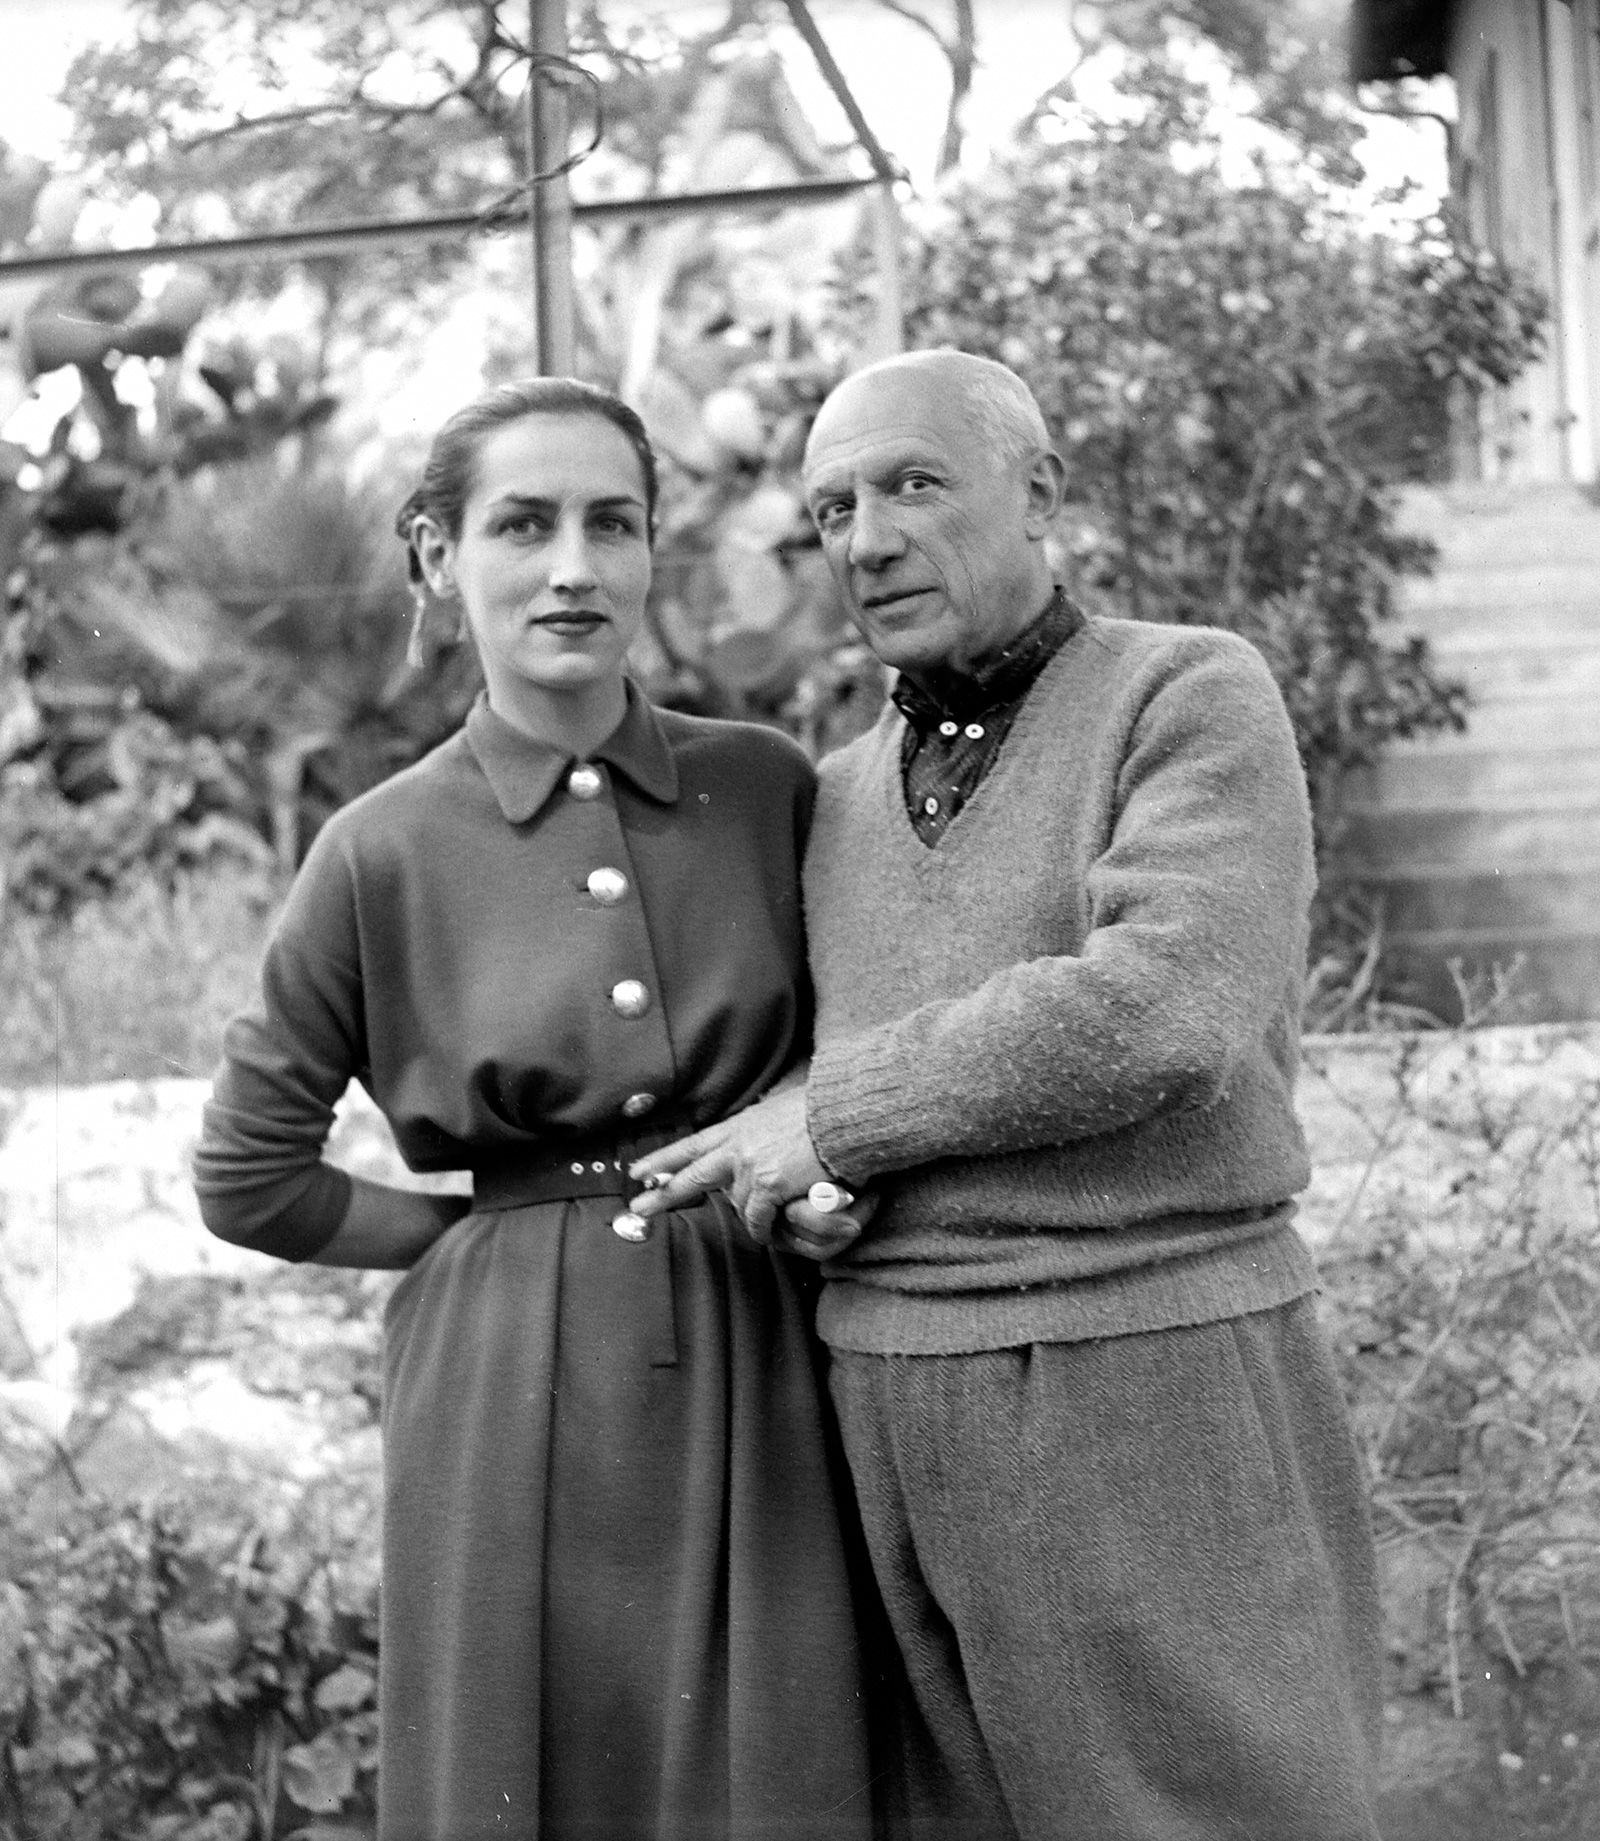 UNSPECIFIED - 1951:  Pablo Picasso and Francoise Gillot, by 1952. LIP-1069-007.  (Photo by Roger Viollet via Getty Images/Roger Viollet via Getty Images)